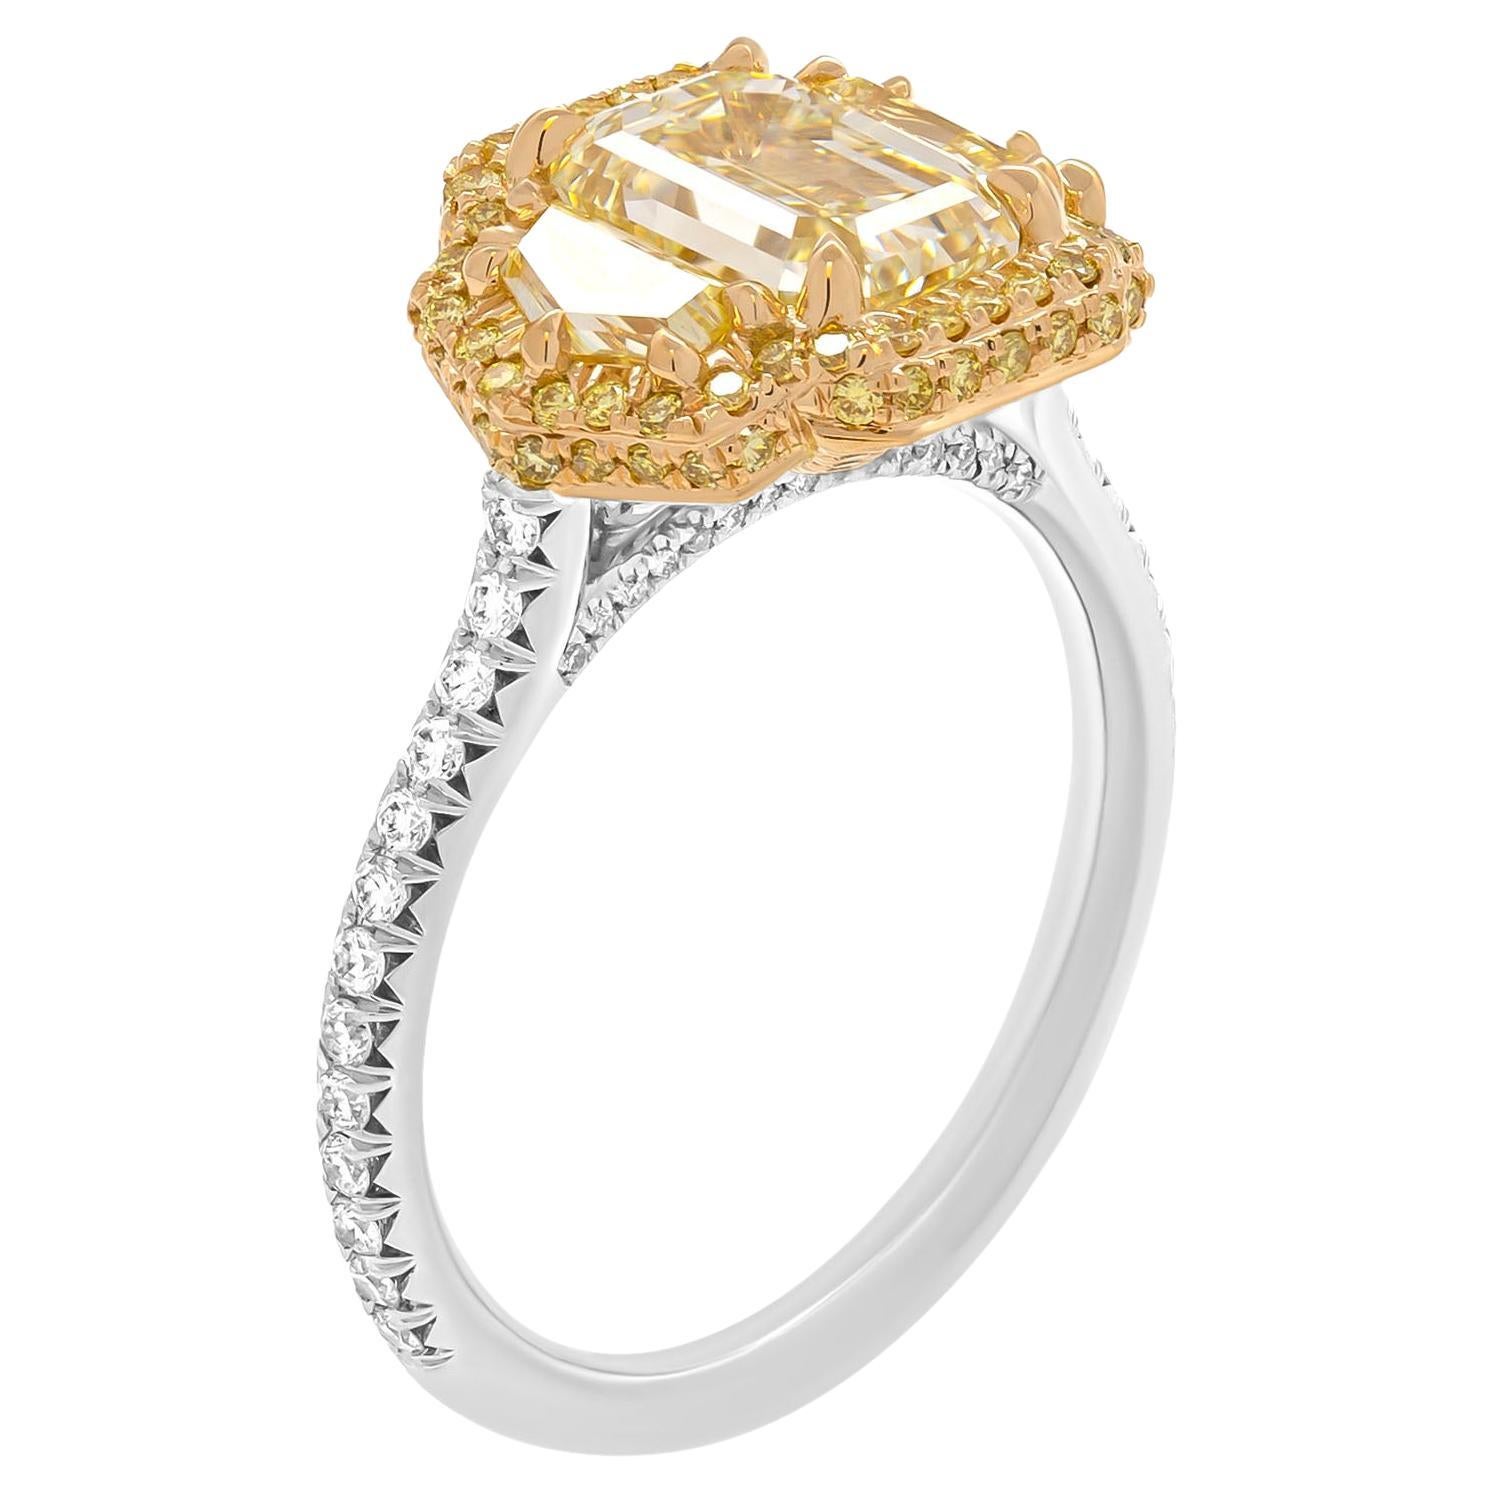 3 Stone Ring in Platinum & 18k Yellow Gold Center with 2.01 Carat Emerald Cut For Sale